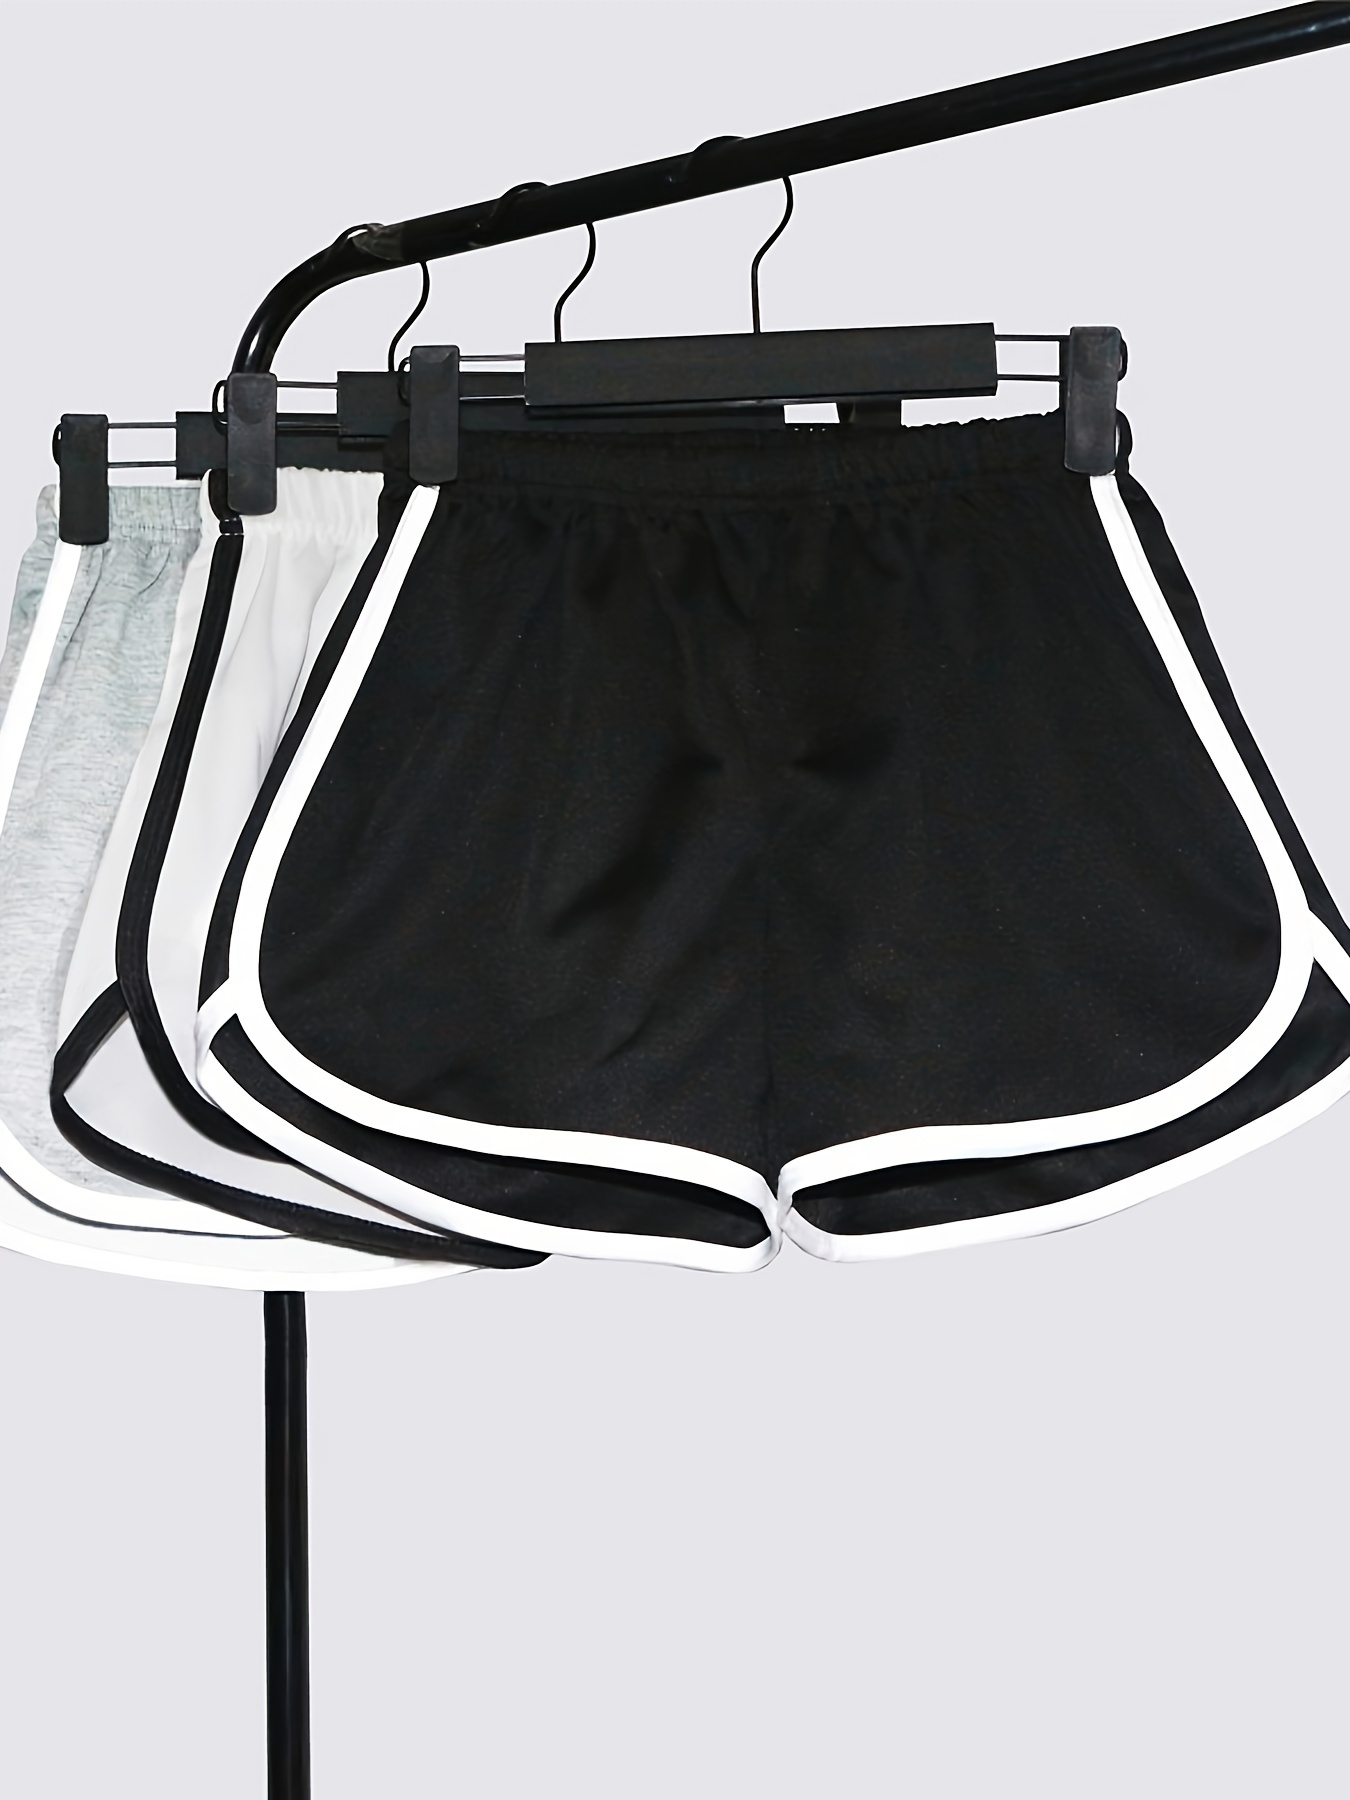 Dolphin Shorts Black  Dolphin shorts, Dolphin shorts outfit, Shorts